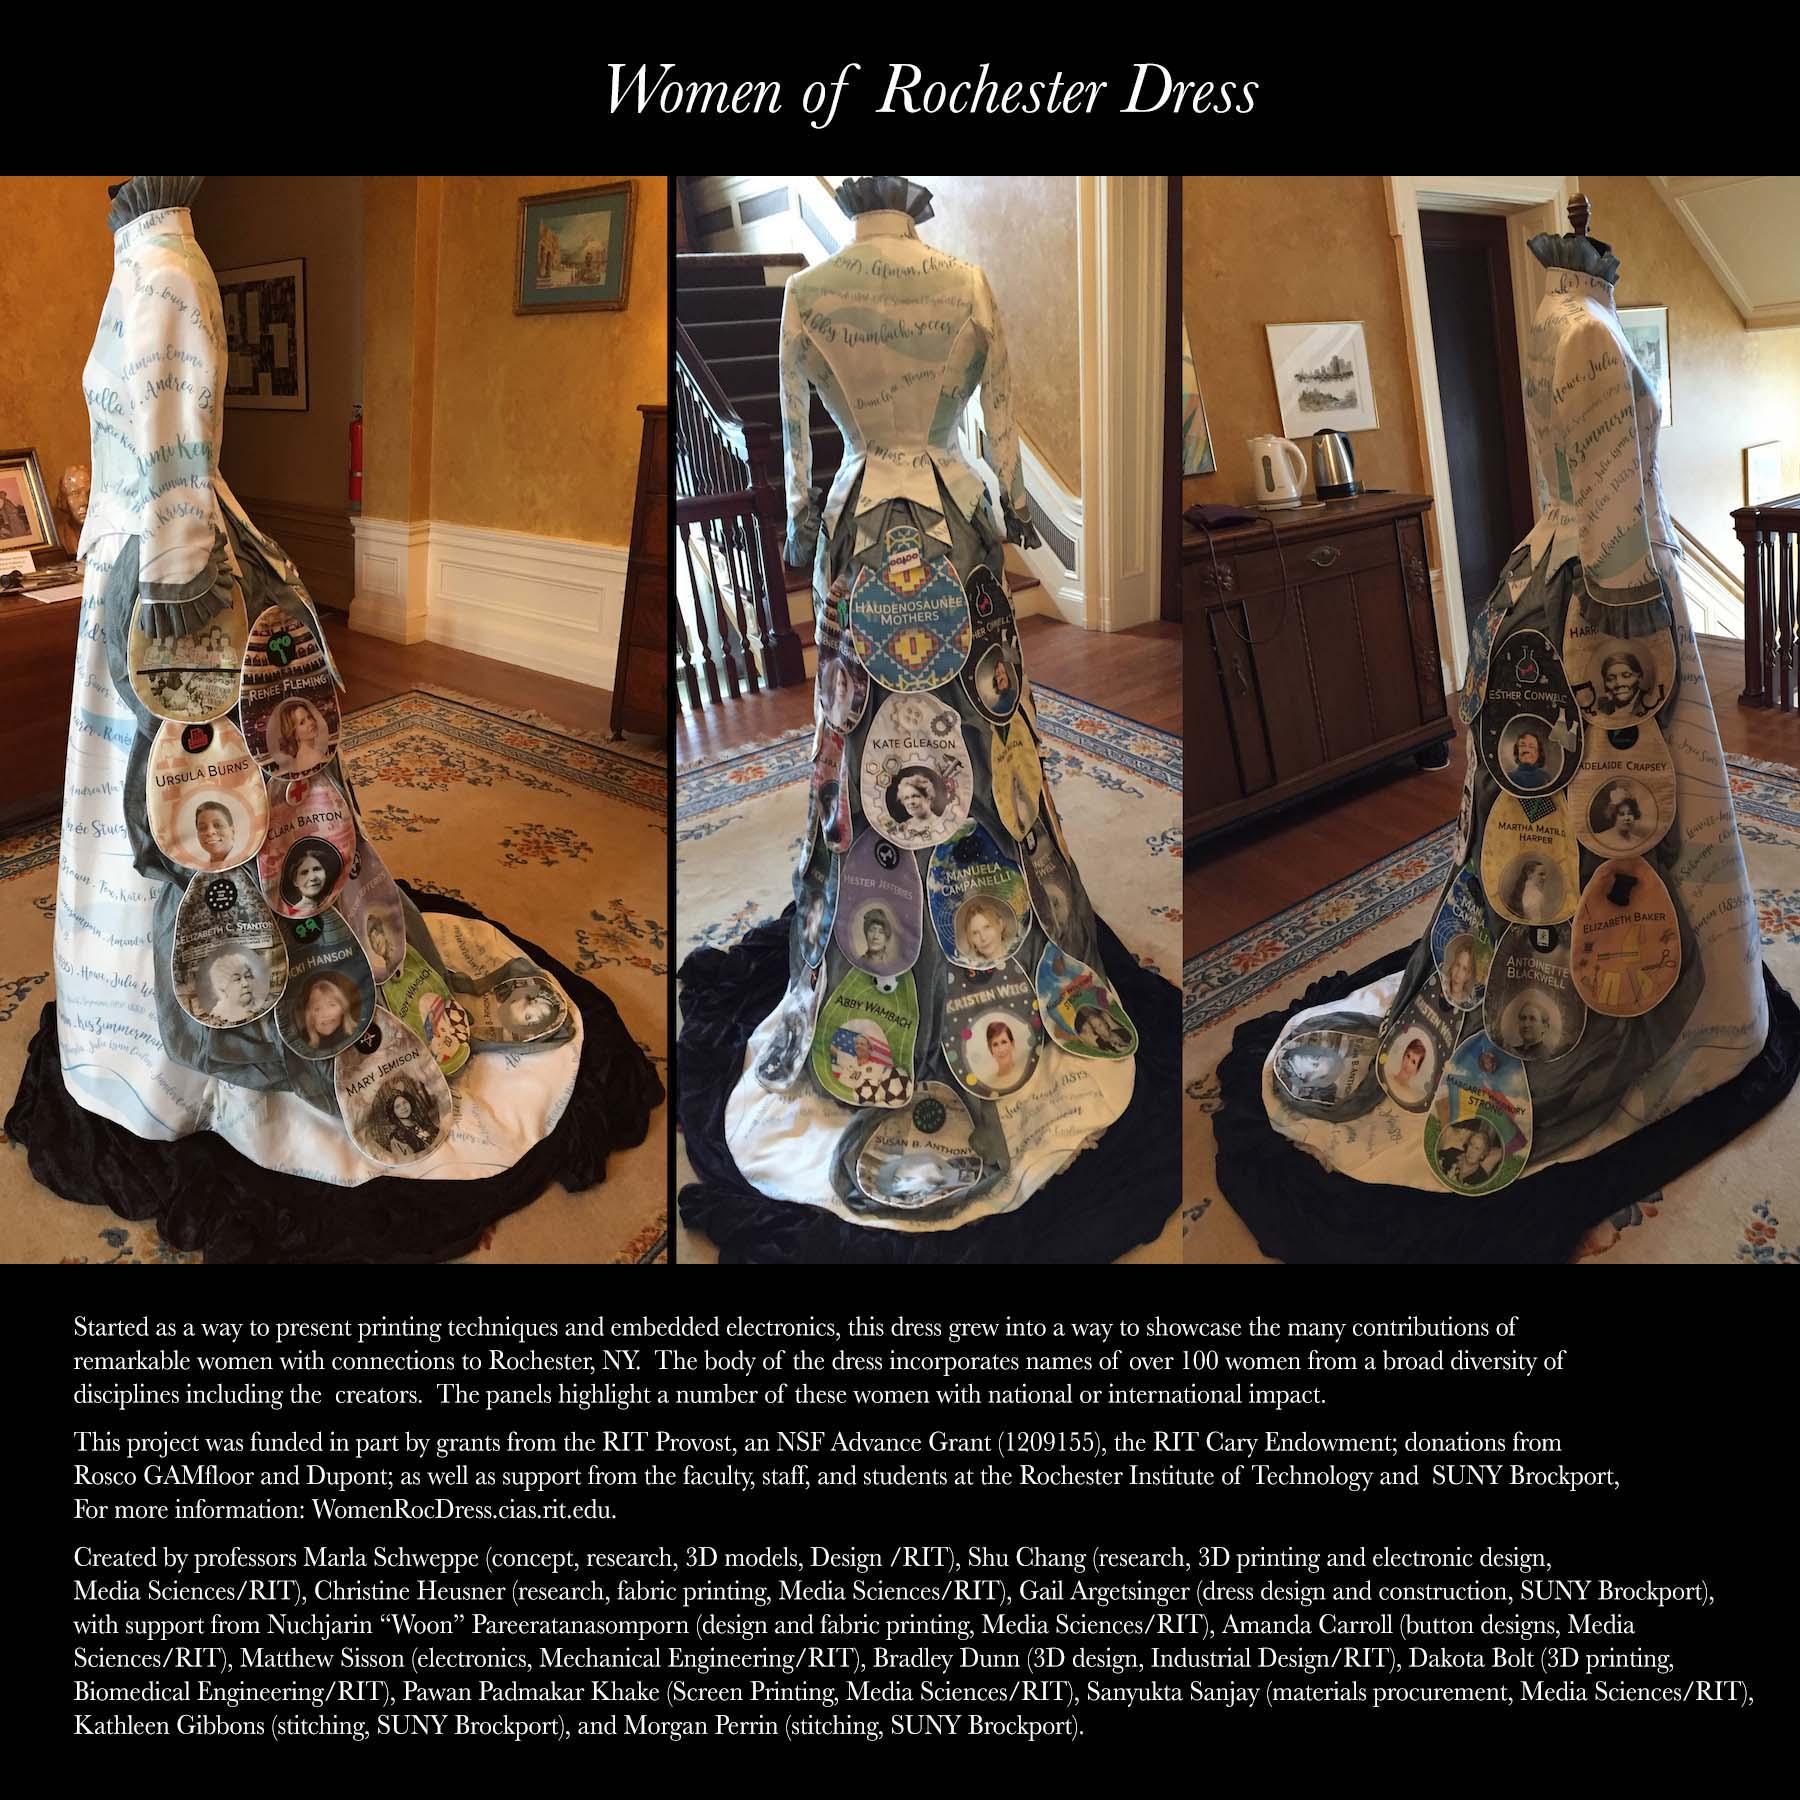 A graphic explaining the Women of Rochester Dress, which celebrates famous women who helped shape Rochester.